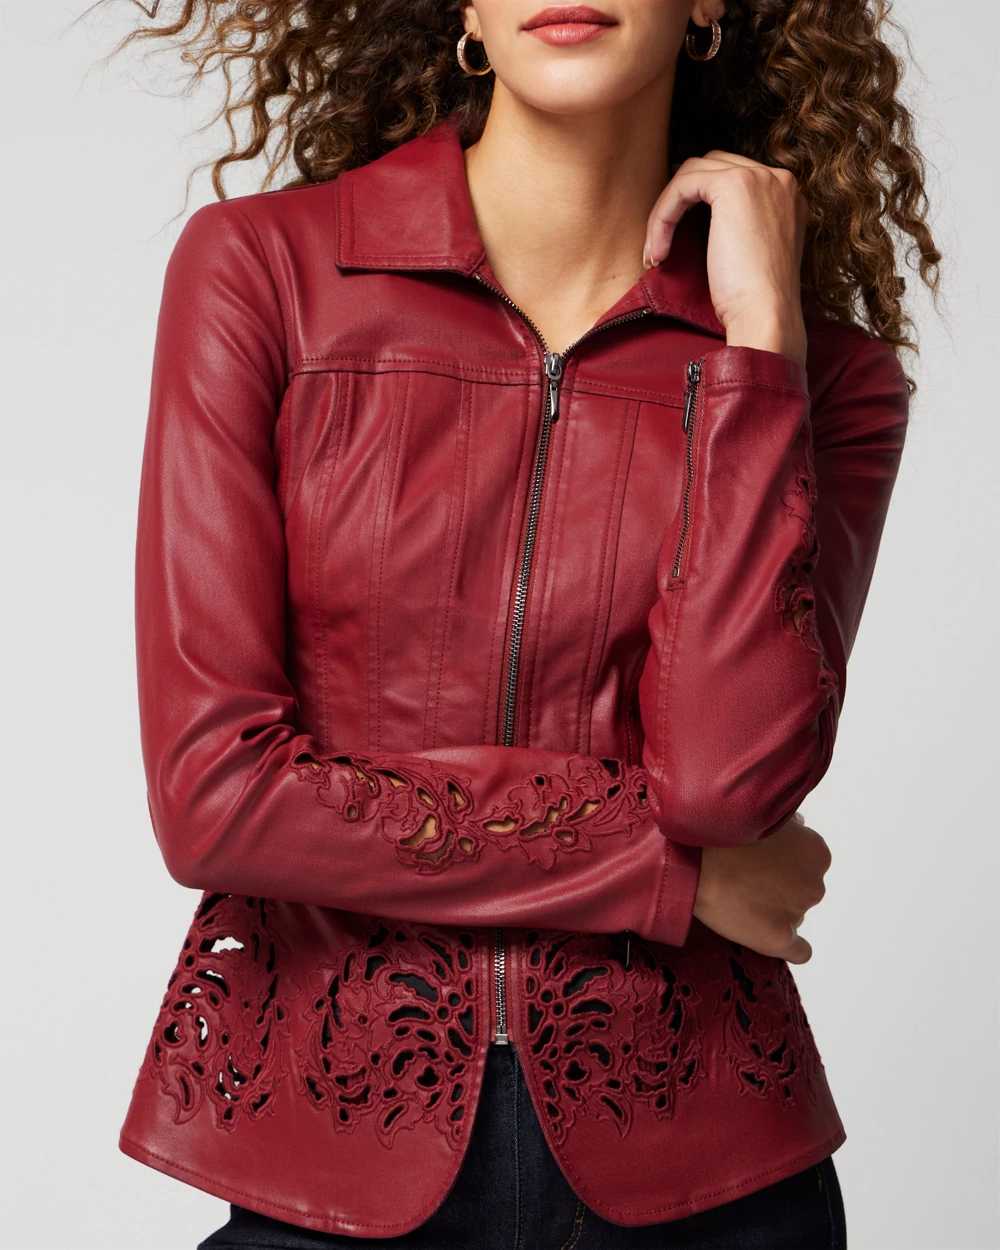 Cutwork Coated Flirty Jacket click to view larger image.